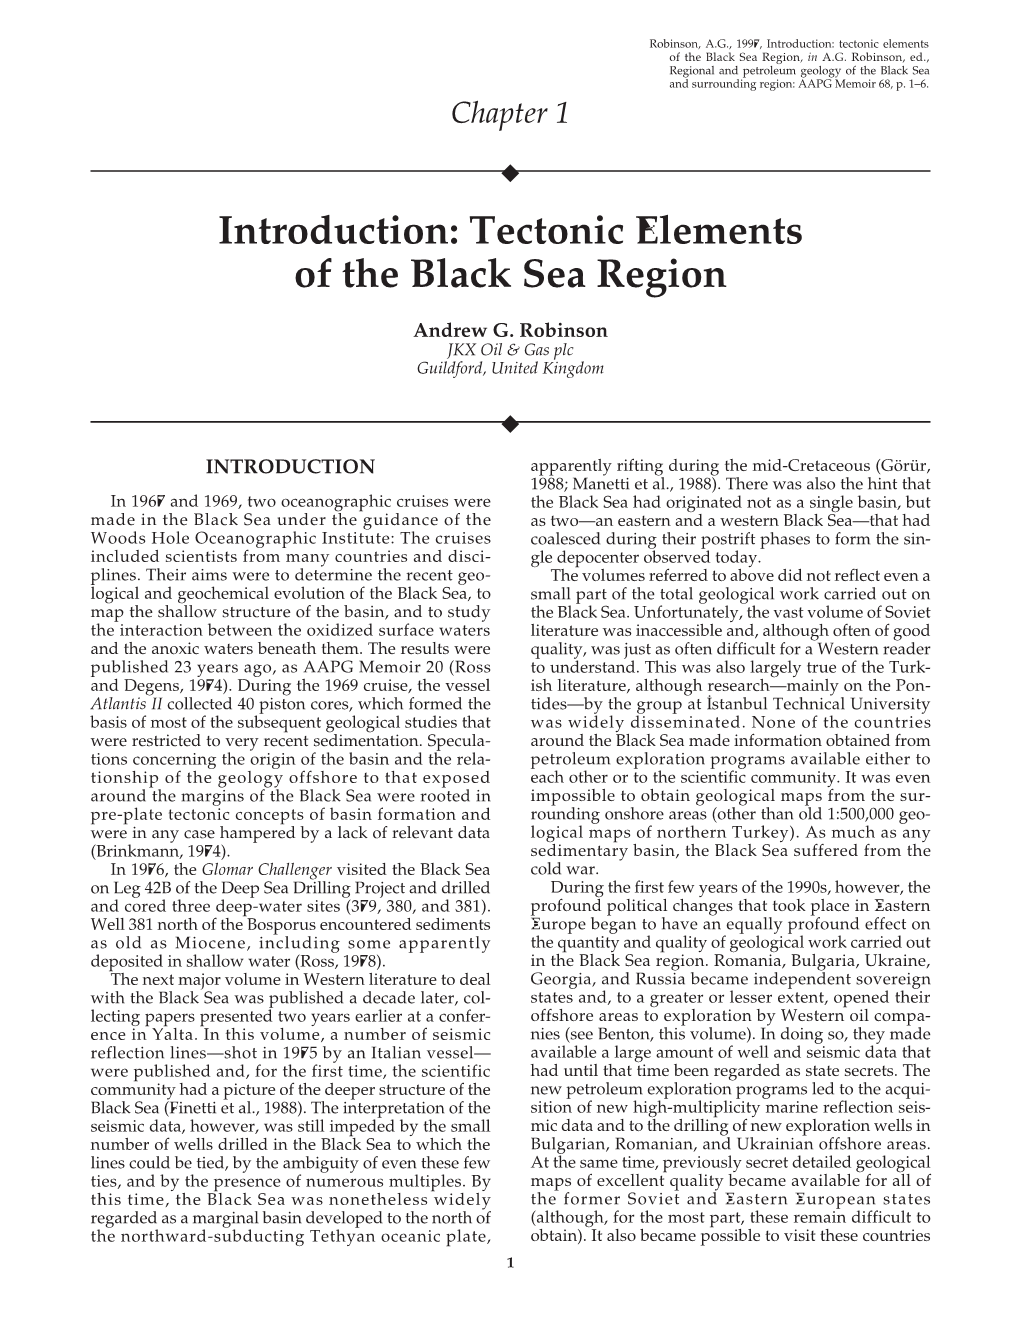 Chapter 1: Introduction: Tectonic Elements of the Black Sea Region